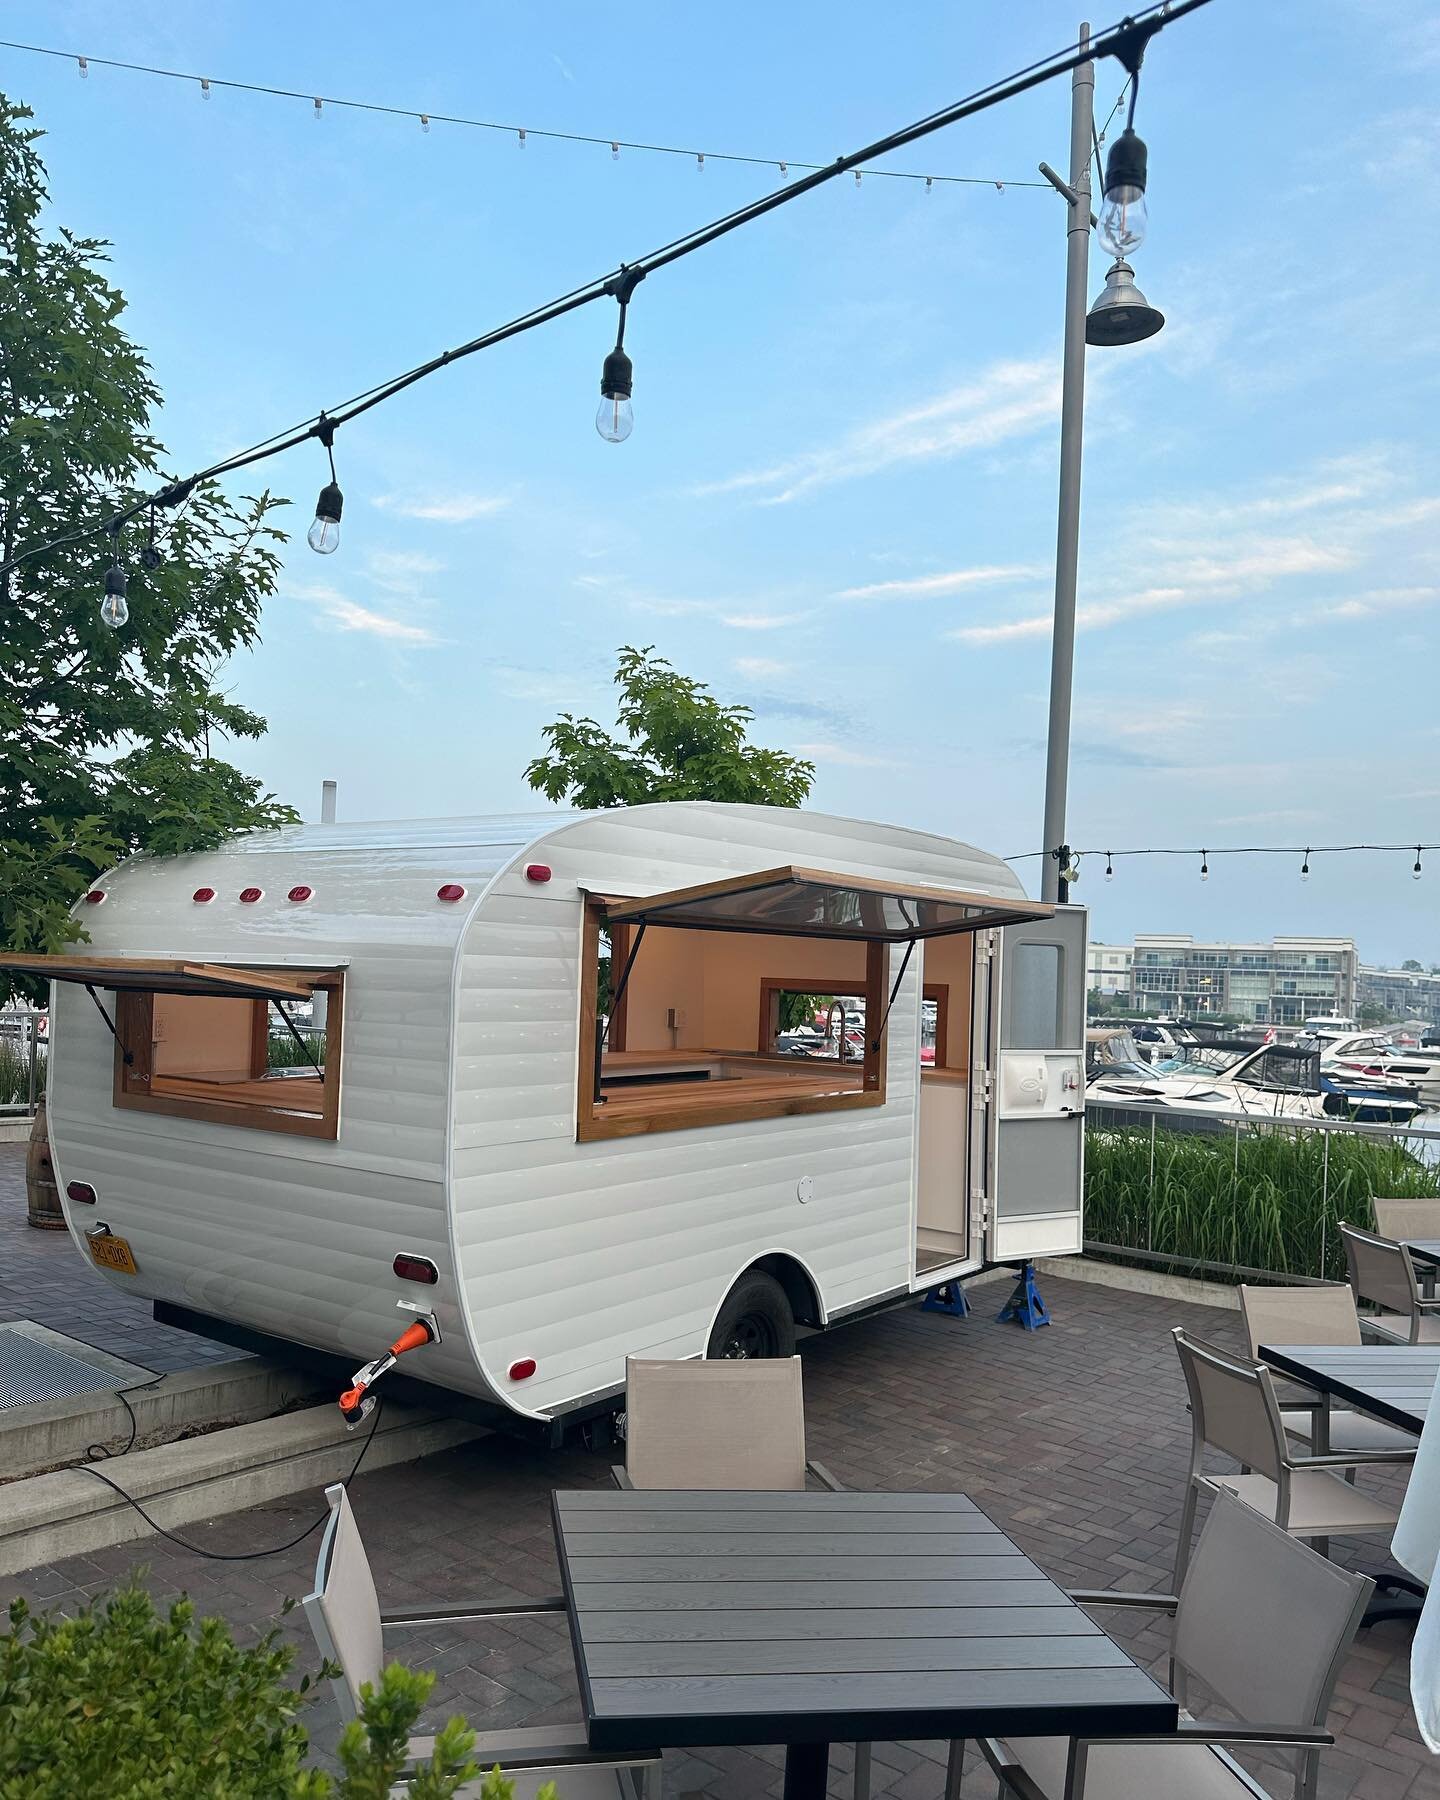 Our Nomad 14s are also perfect for bars and this one was built with two serving windows and two kegerators at a patio in Friday Harbour. 

Looking to start or expand your business? Send us a message!

#mobilebar #coffeetrailer #mobilestore